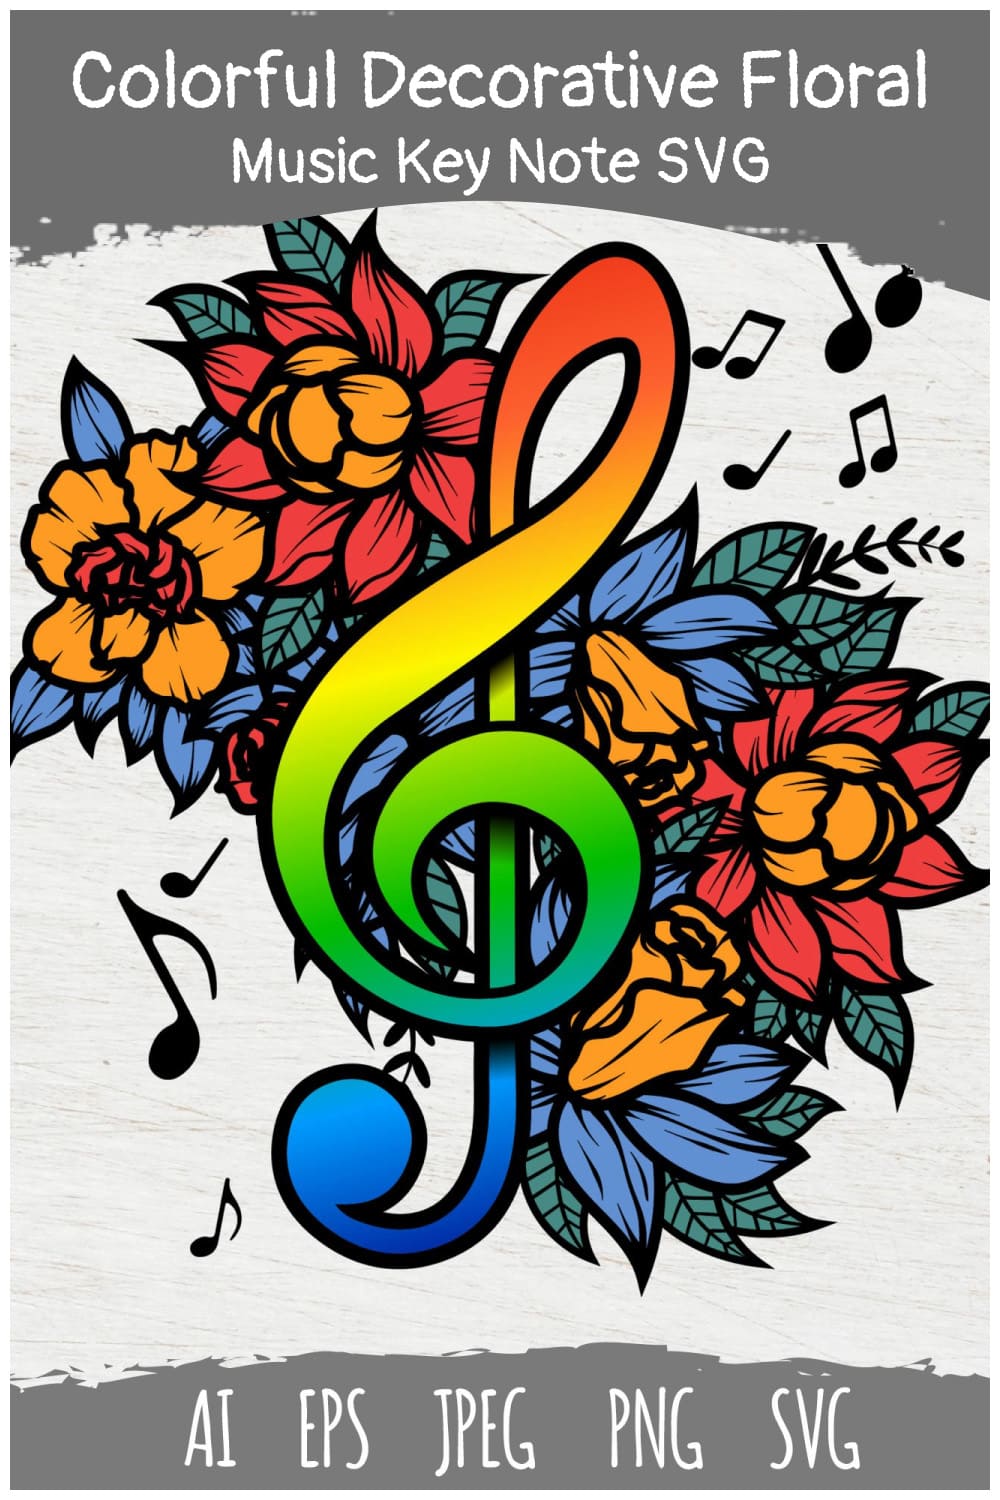 So colorful music note.